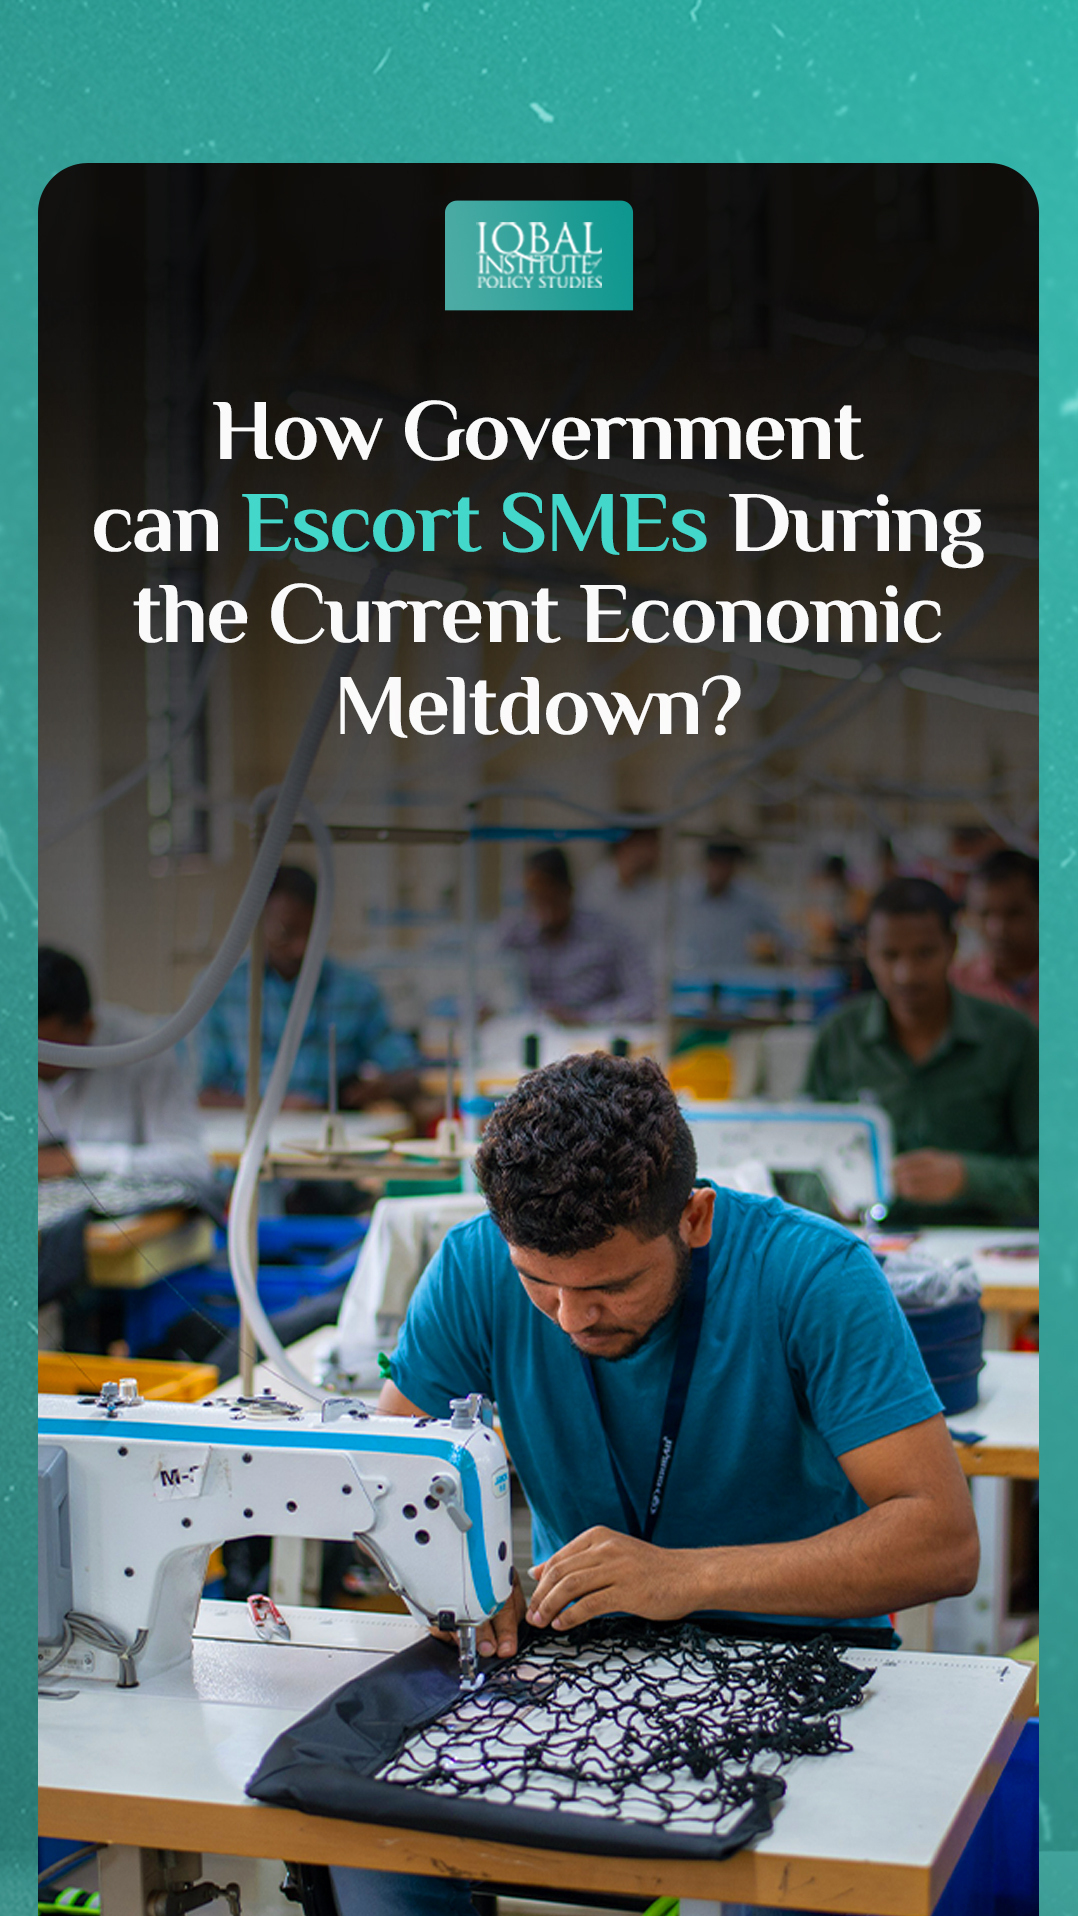 How government can escort SMEs during the current economic meltdown?